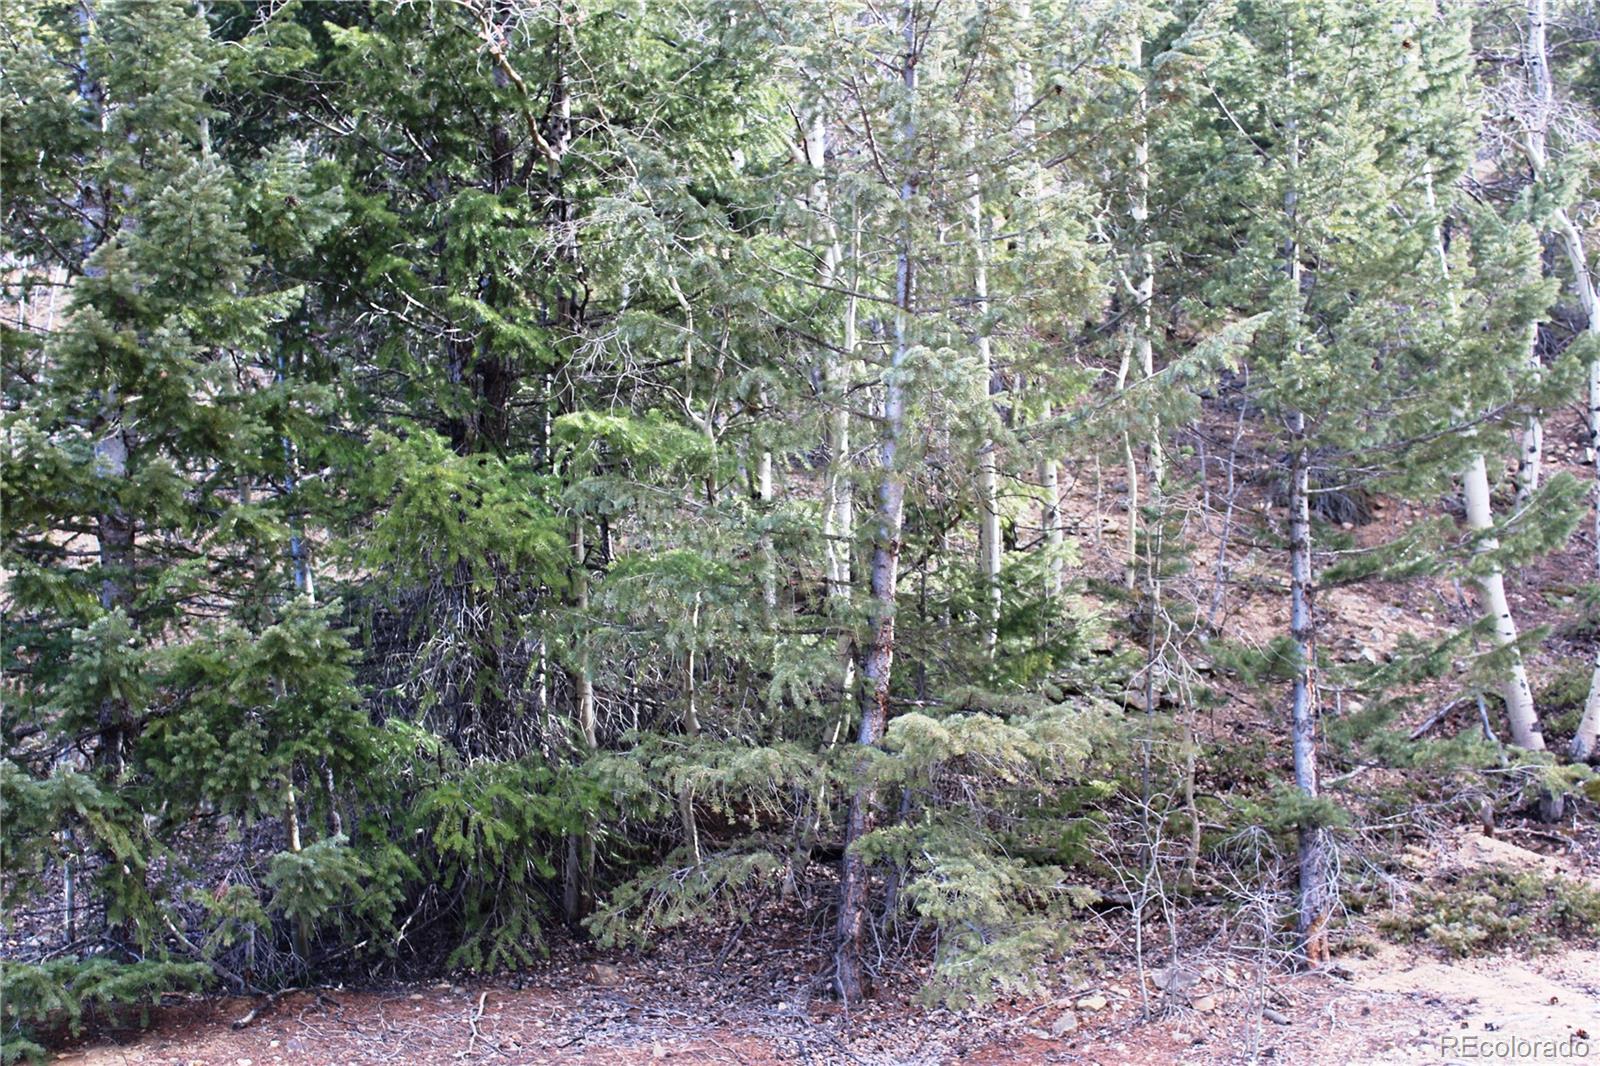 a view of a forest with lots of trees